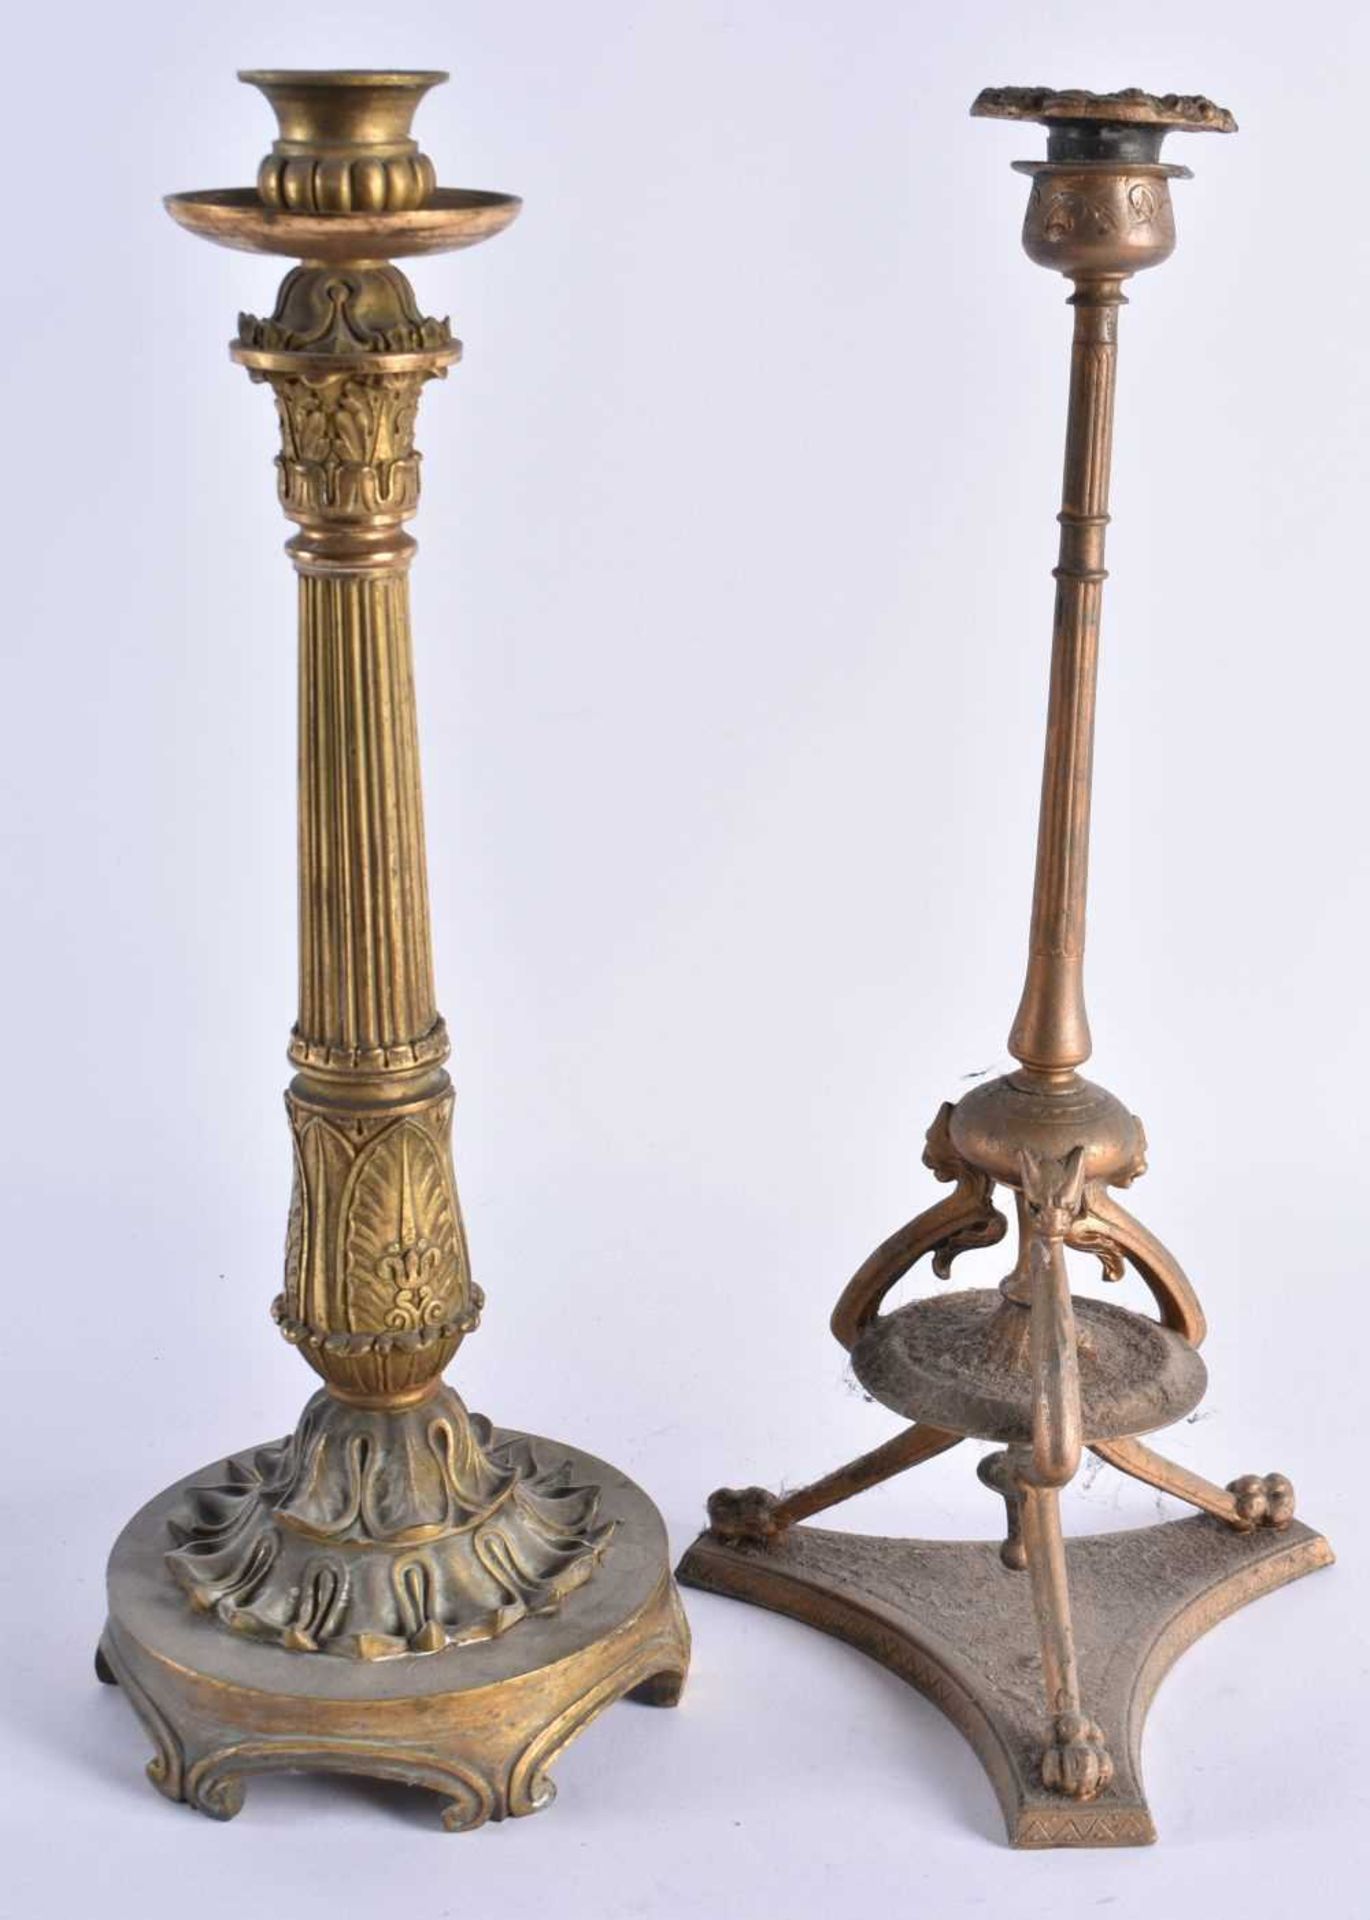 TWO LARGE 19TH CENTURY EUROPEAN BRONZE CANDLESTICKS. 30 cm high. (2) - Image 2 of 10